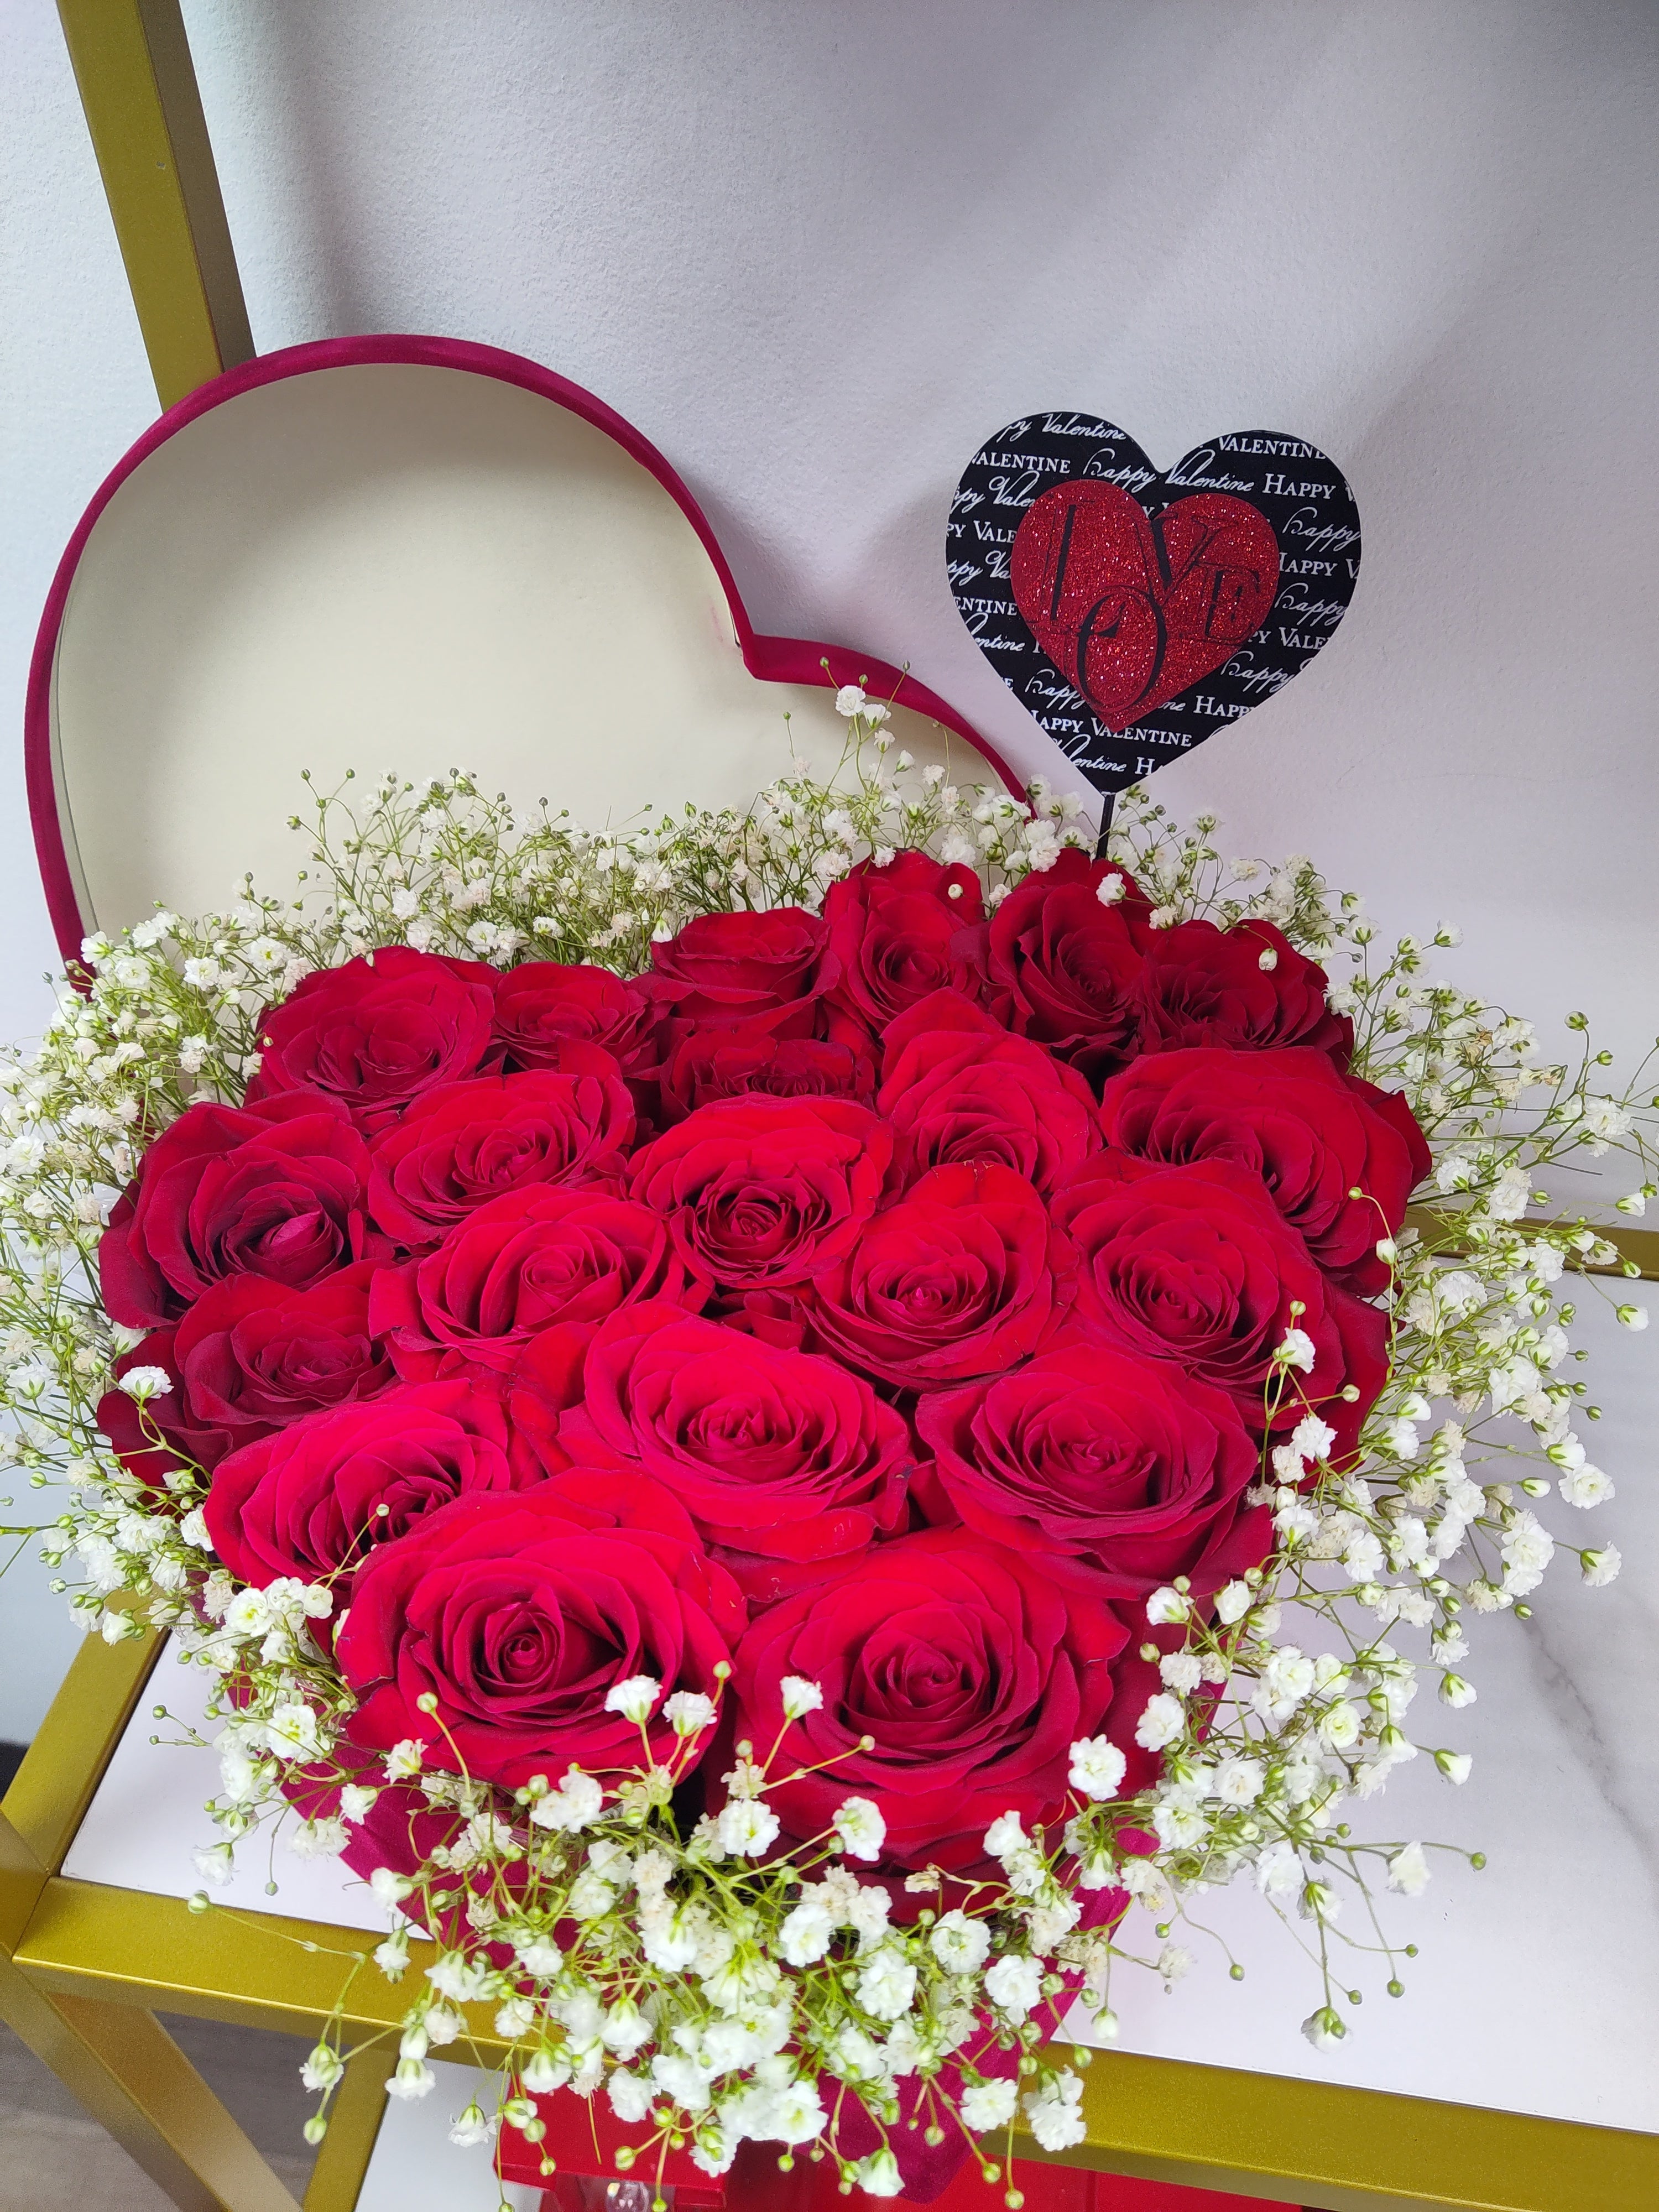 "With my whole HEART" - Red Roses + Velvet Heart Box (Sweetest Day)